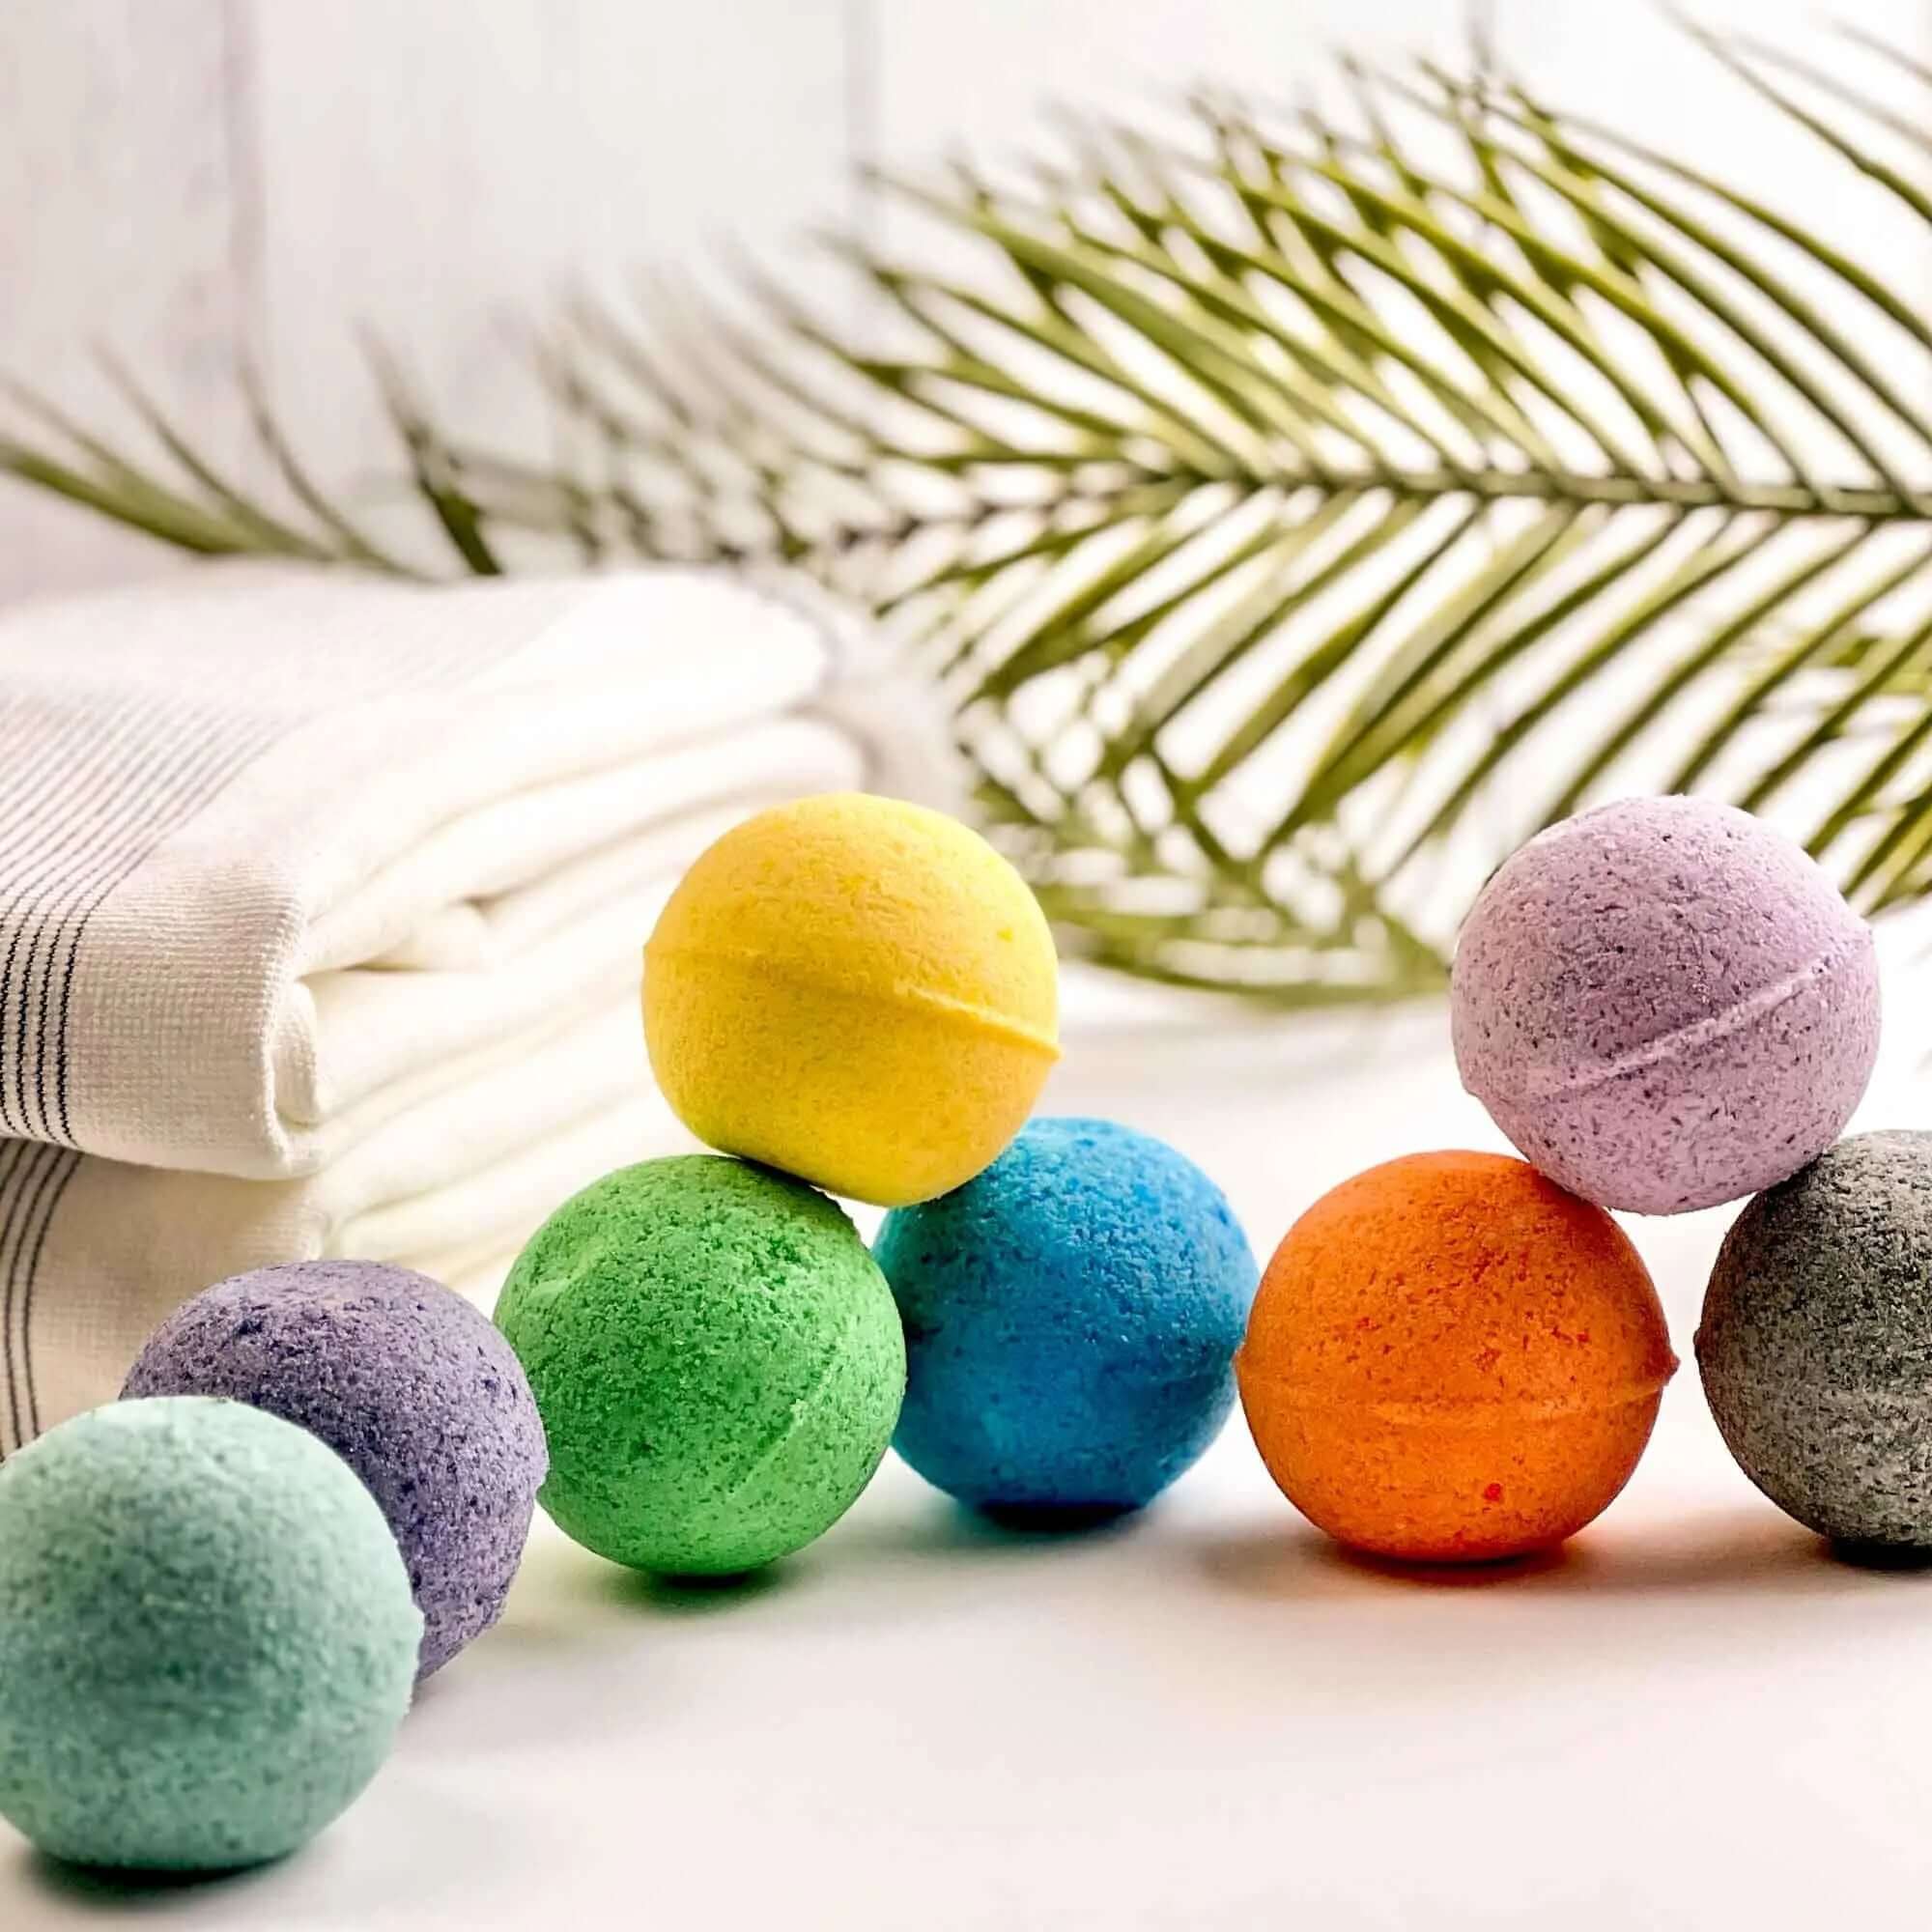 Black Coral Bath Bombs | Handmade Spa Fizzies with a Refreshing Ocean Scent